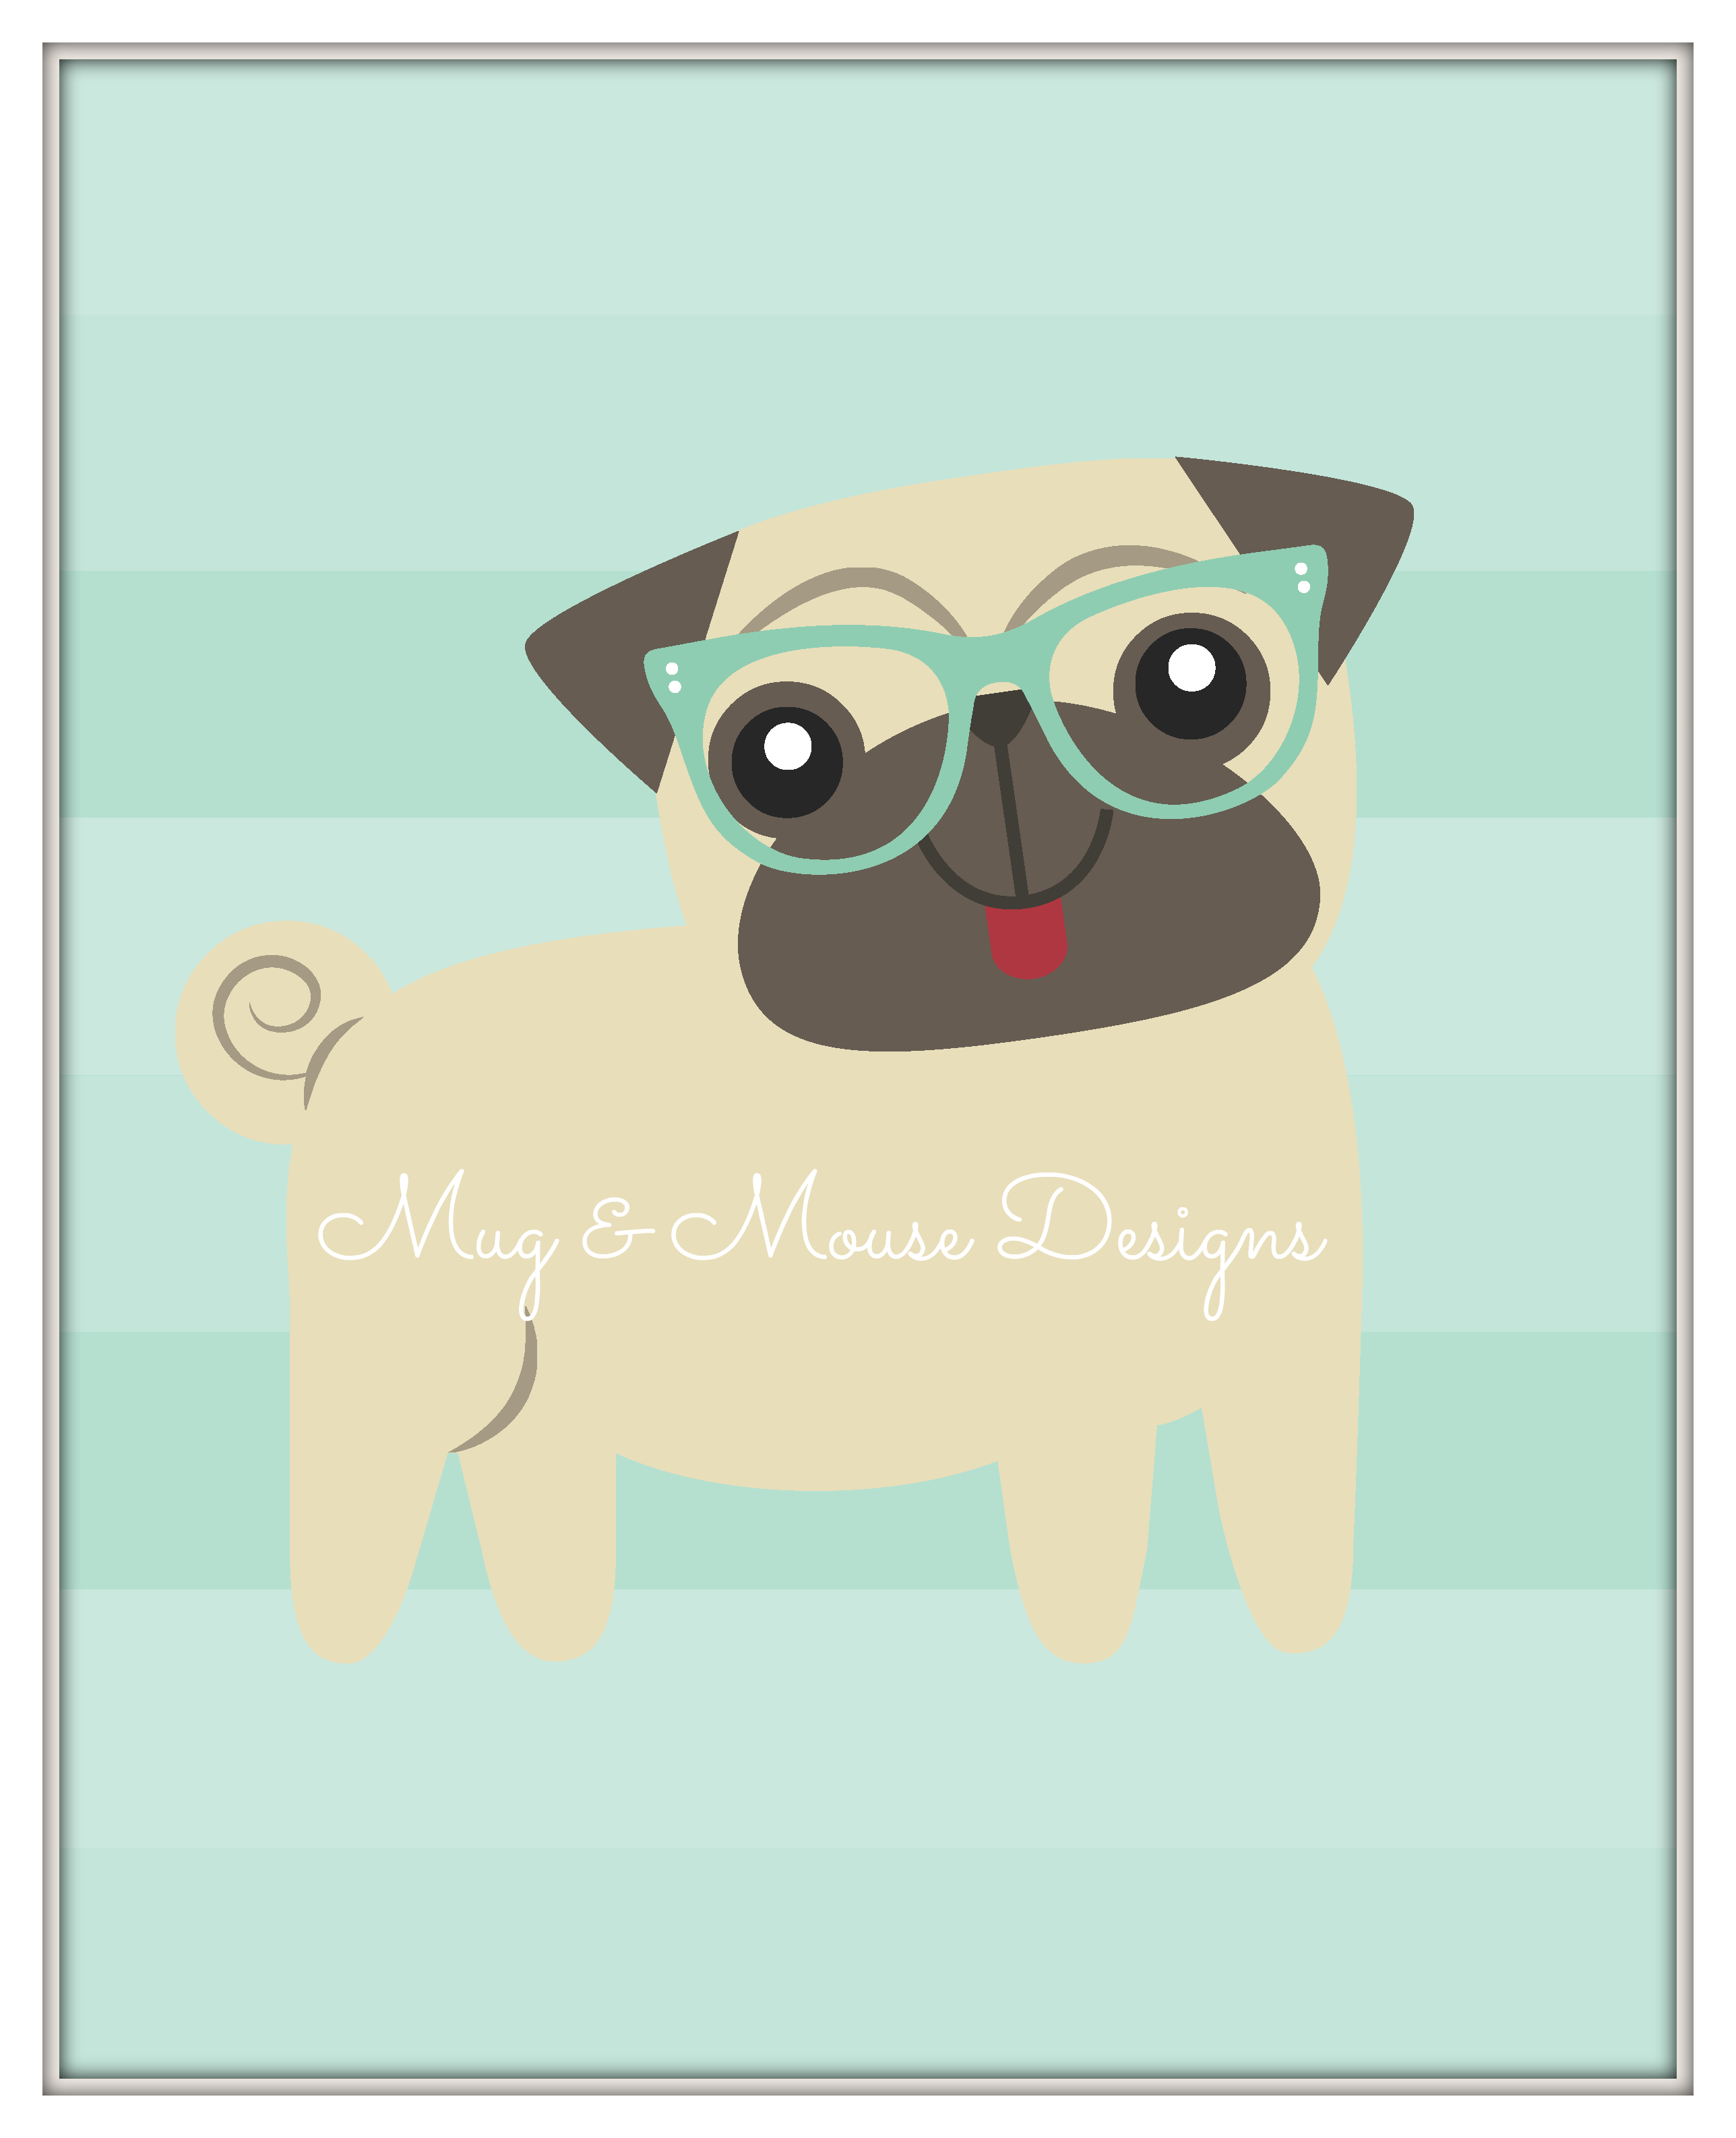 Instant Download-Hipster Pug Wall Printable, Dog Printable Art Print, 8x10, nursery puppy print, #hipsterdog #hipsterpug #puglife AD3348